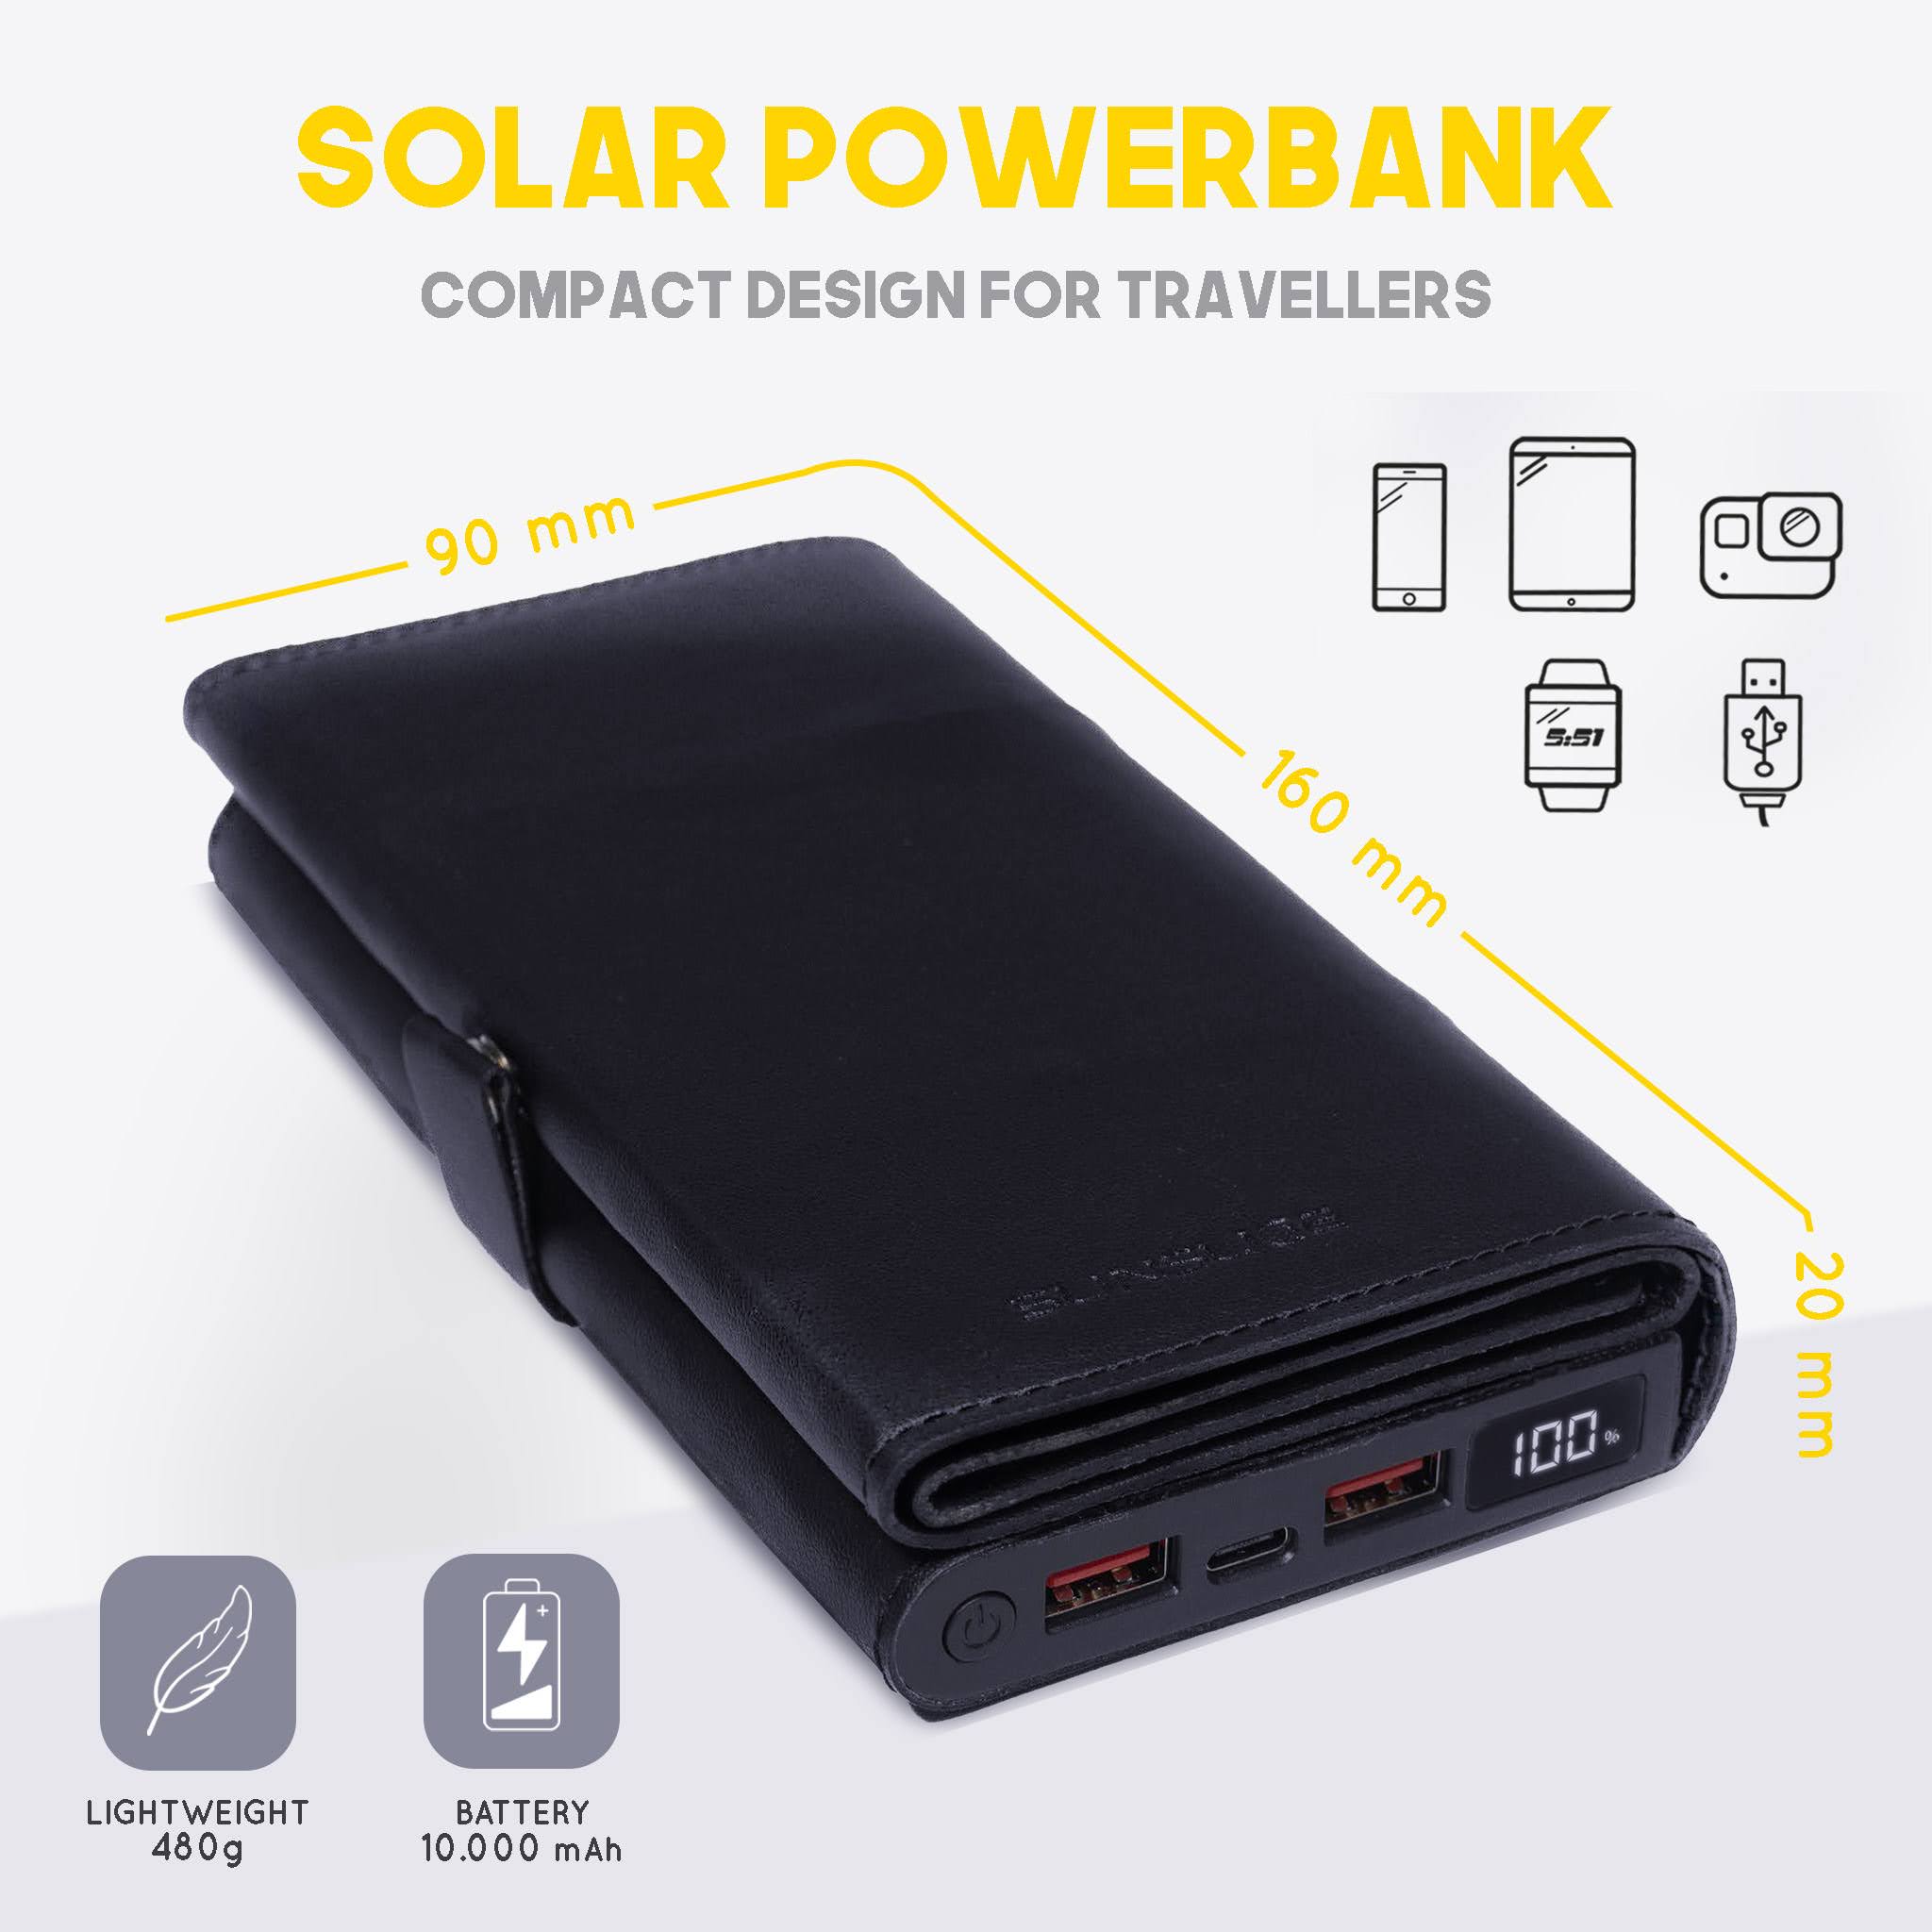 sunslice's new solar power bank with integrated 10000mAh battery and LCD display